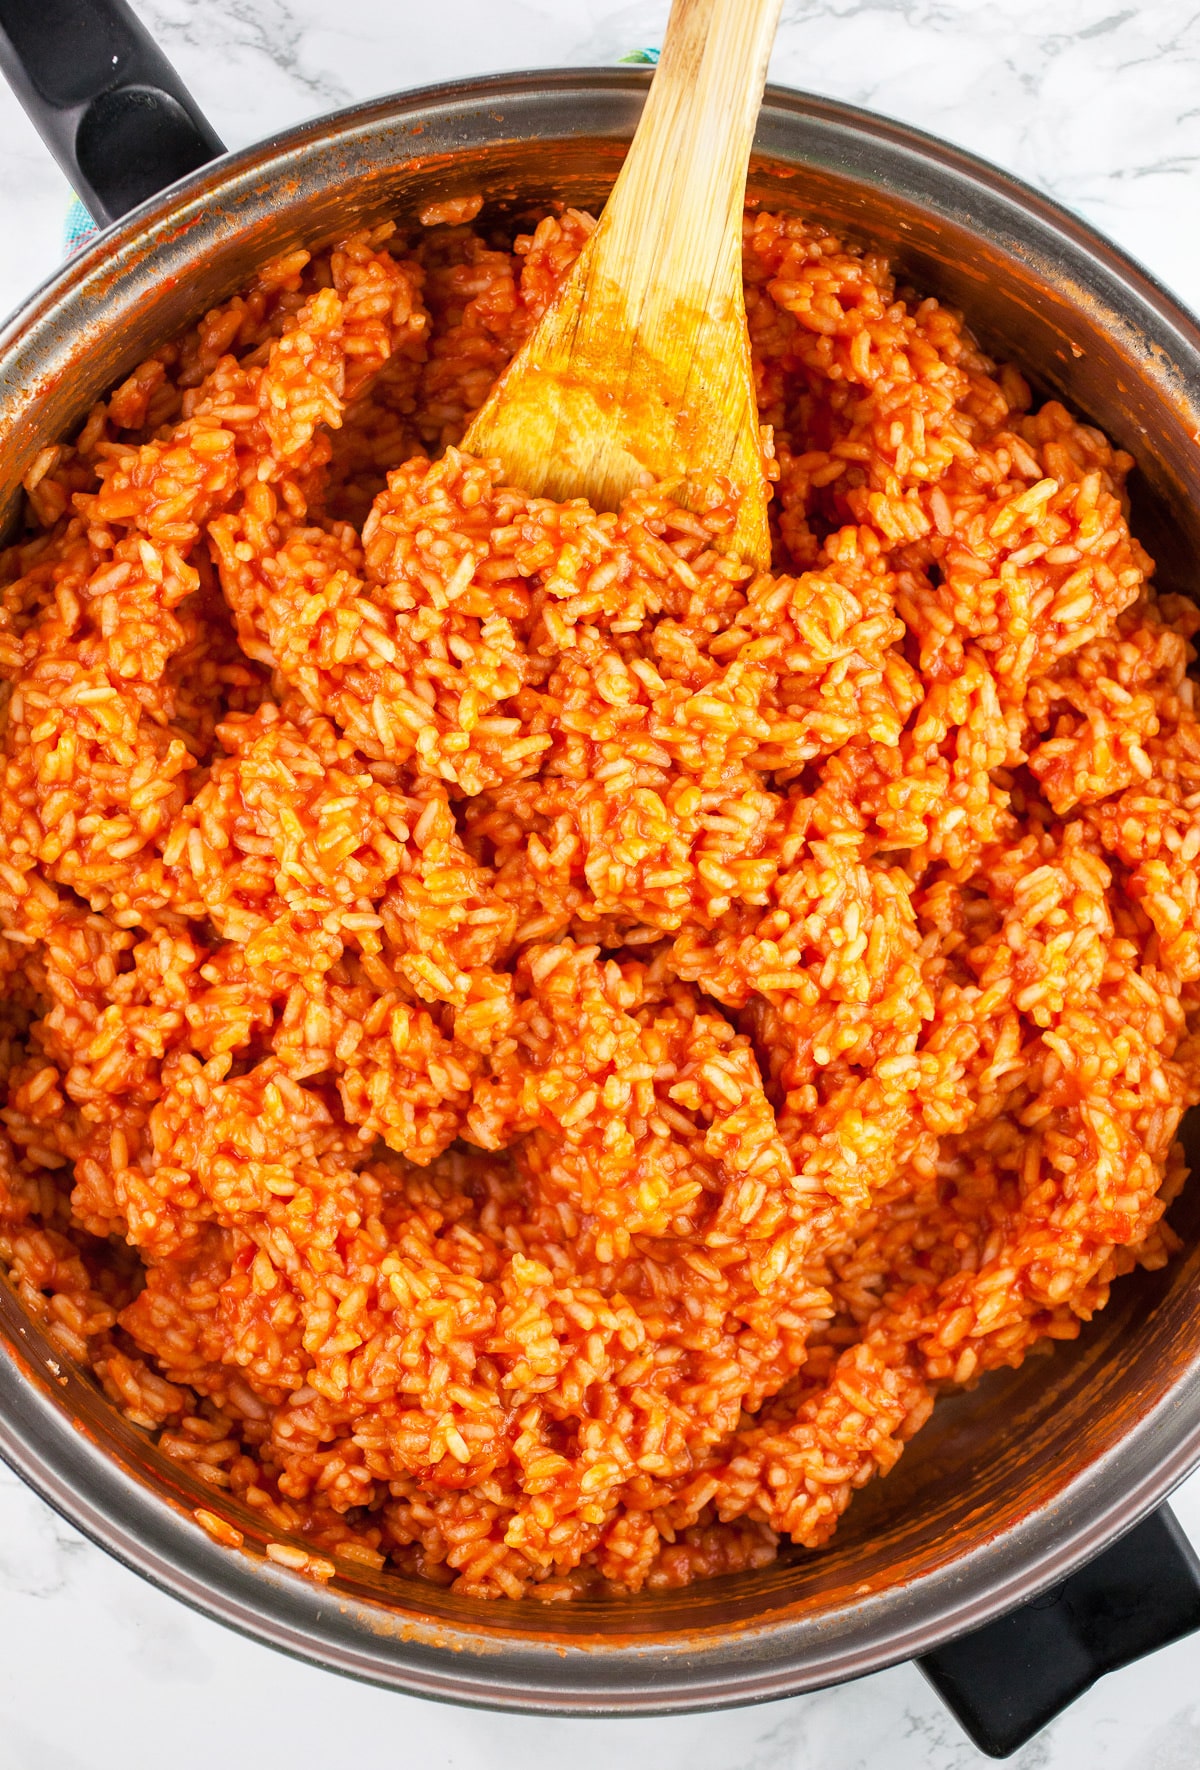 Cooked rice in tomato sauce in skillet with wooden spoon.